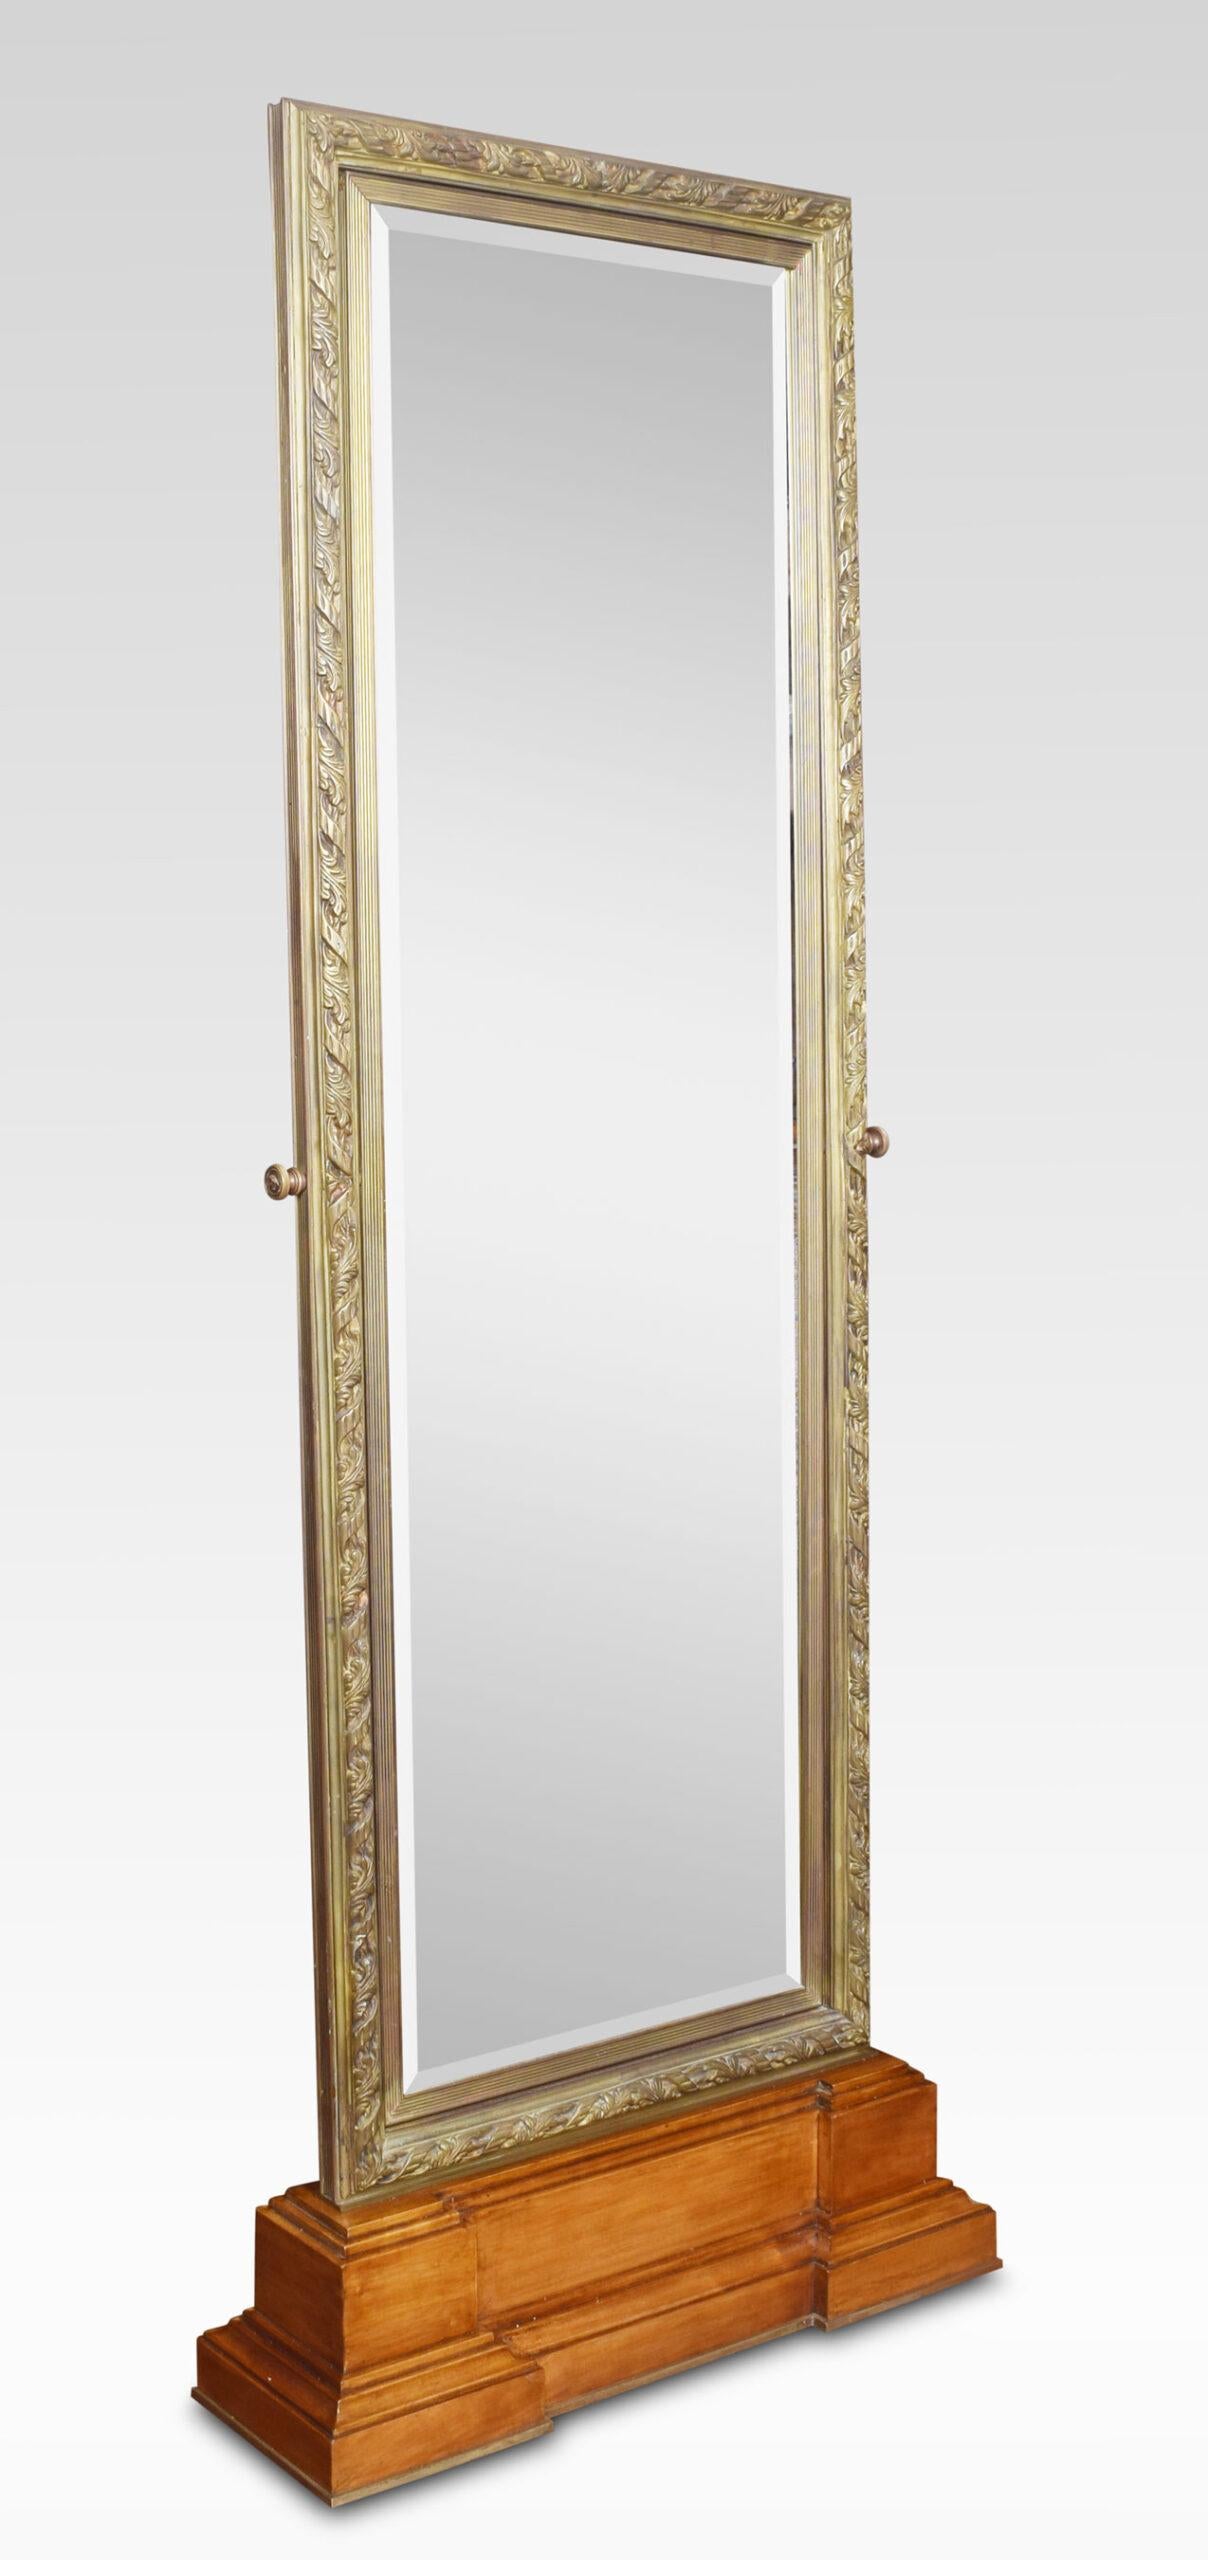 Pair of large tooled bronze framed two-sided cheval mirrors, the rectangular tooled frame enclosing the original adjustable double plate mirror. Raised up on stepped walnut base. The mirrors were purchased from a London Versace showroom when they